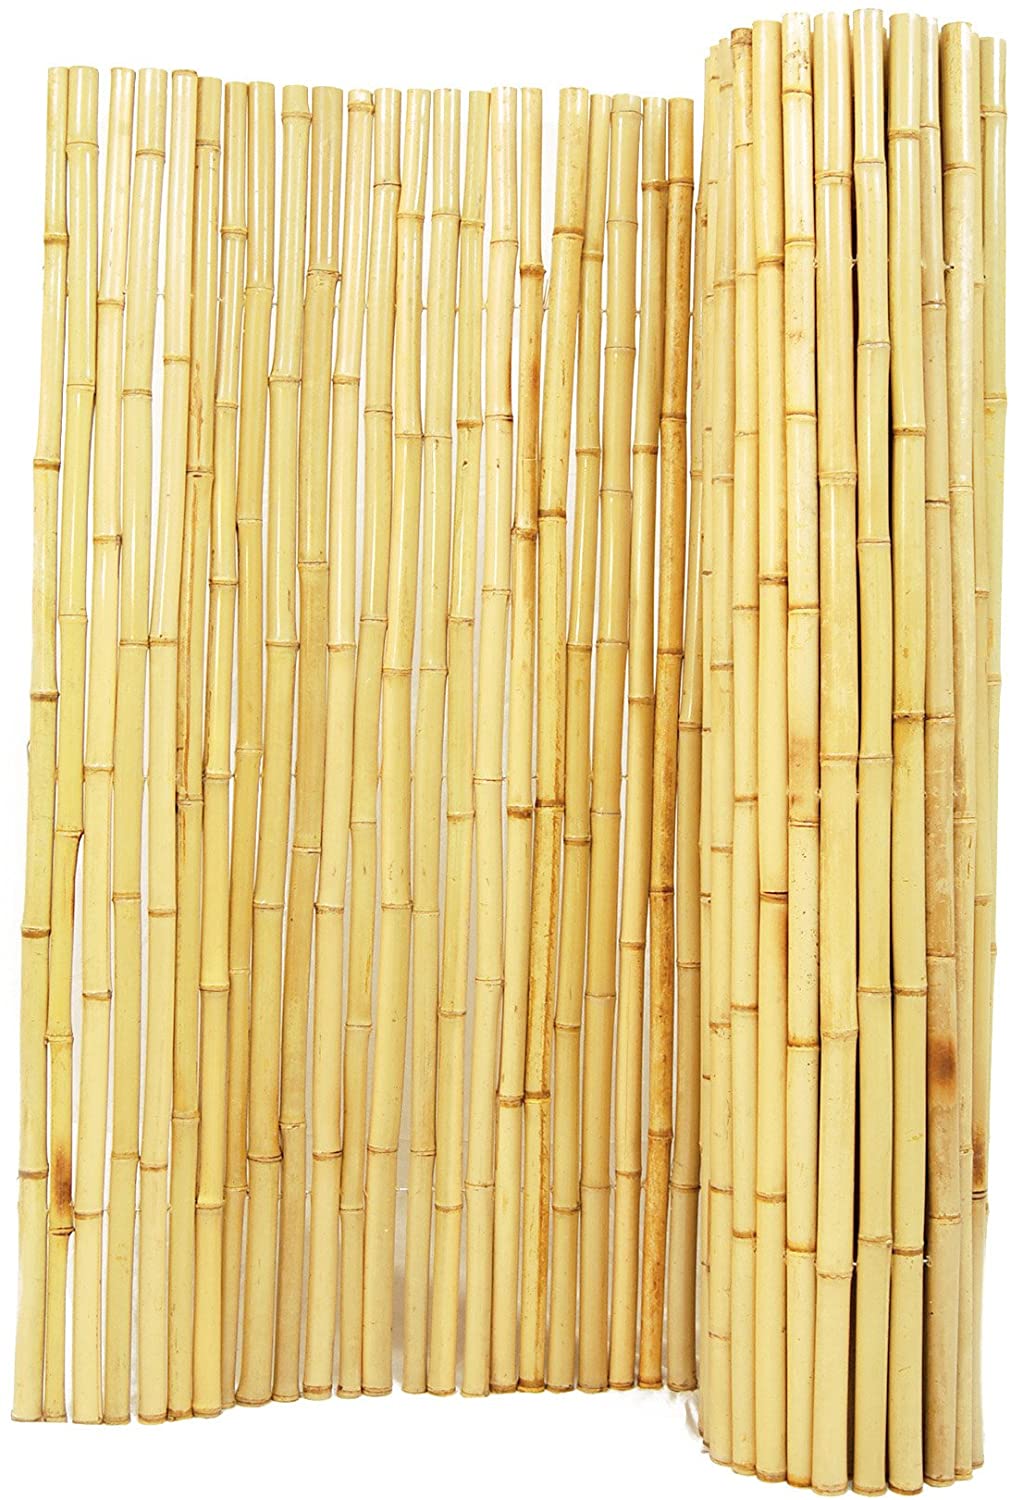 Backyard X-Scapes BAMA-BF01 Natural Rolled Bamboo Fence, 3/4